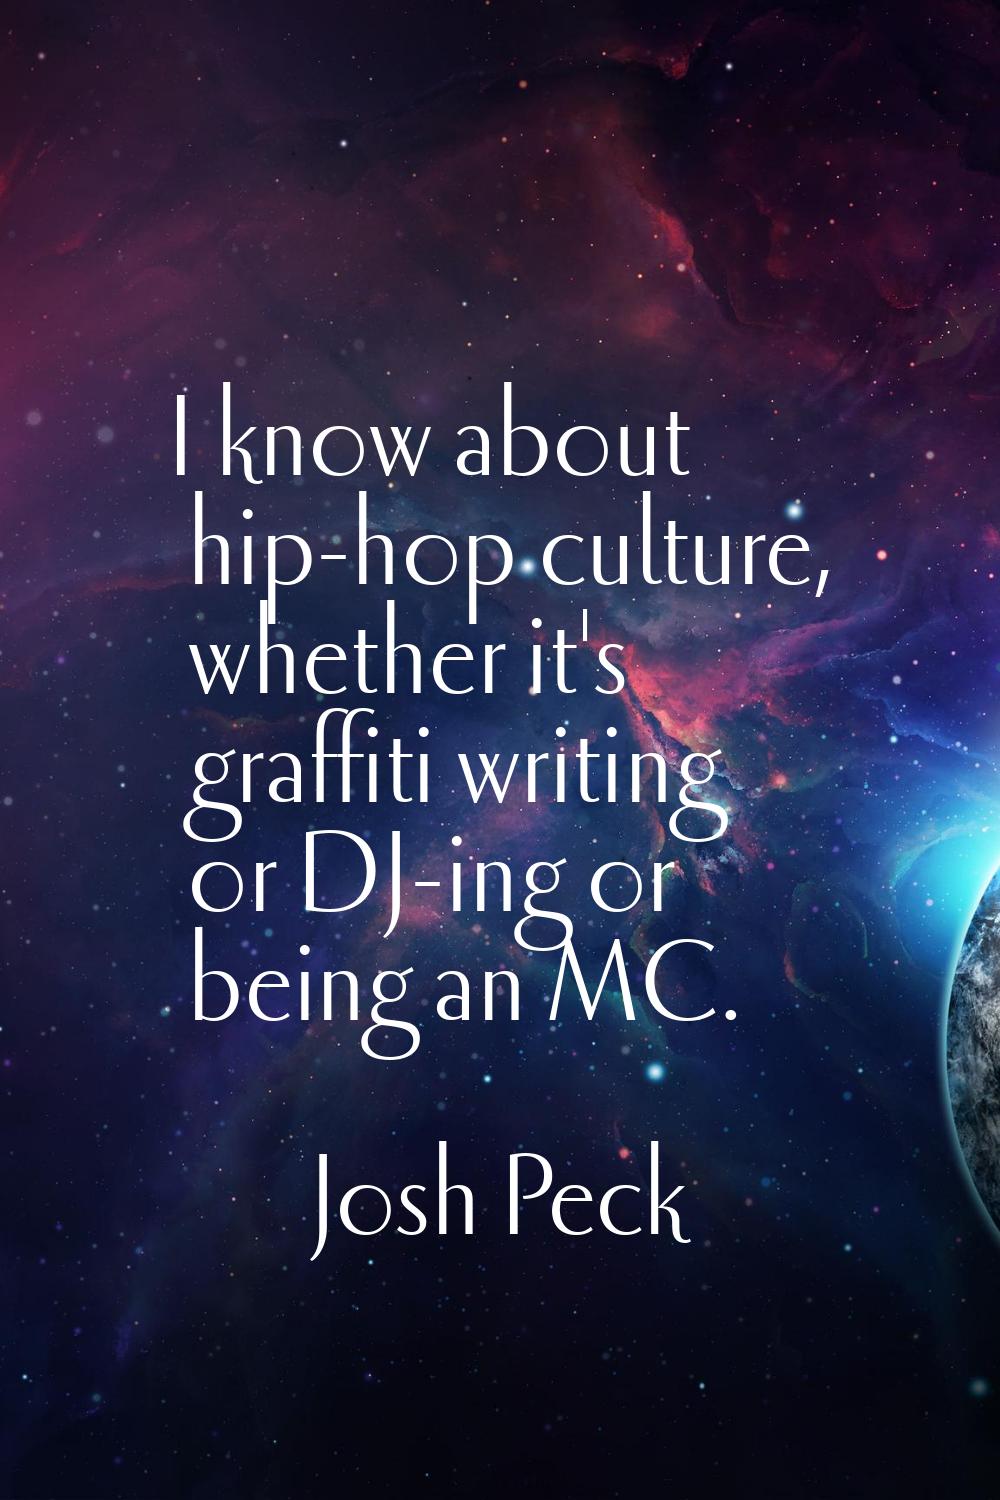 I know about hip-hop culture, whether it's graffiti writing or DJ-ing or being an MC.